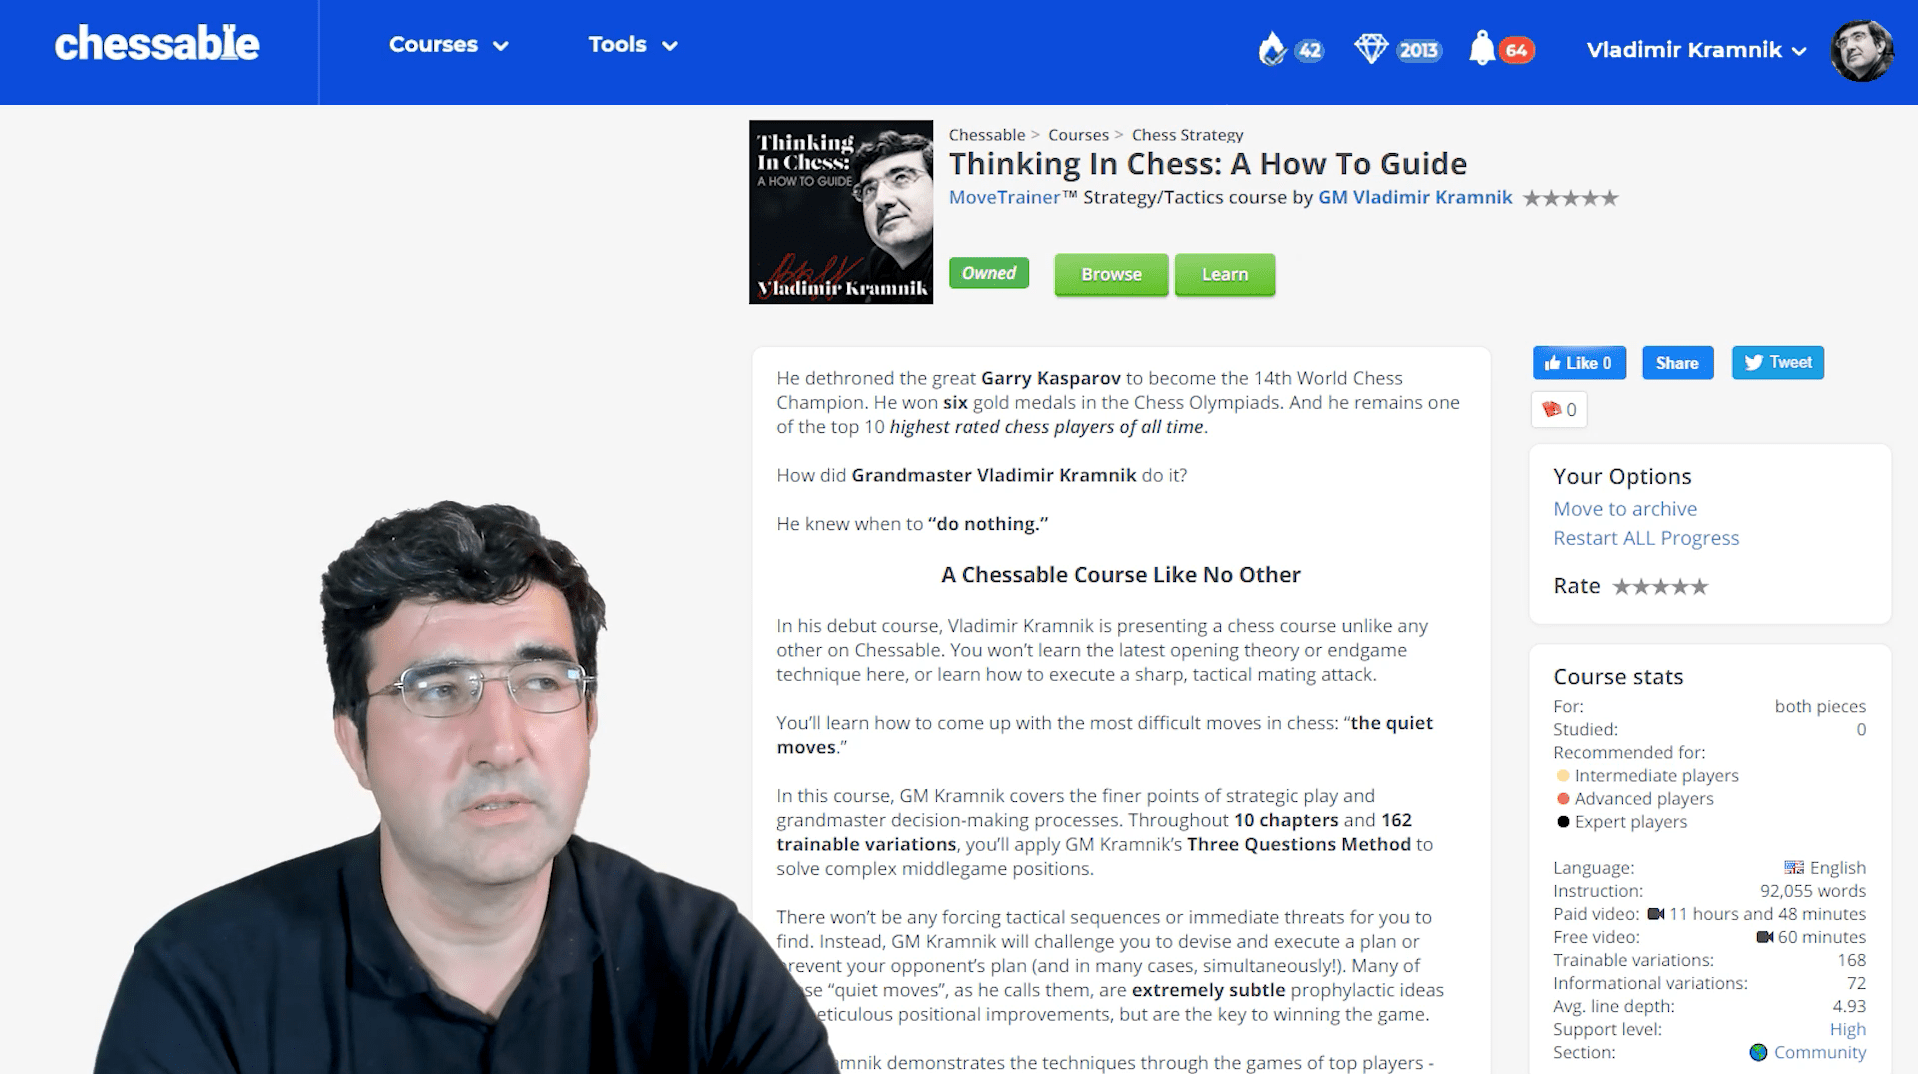 Vladimir Kramnik teaches you how to think in chess